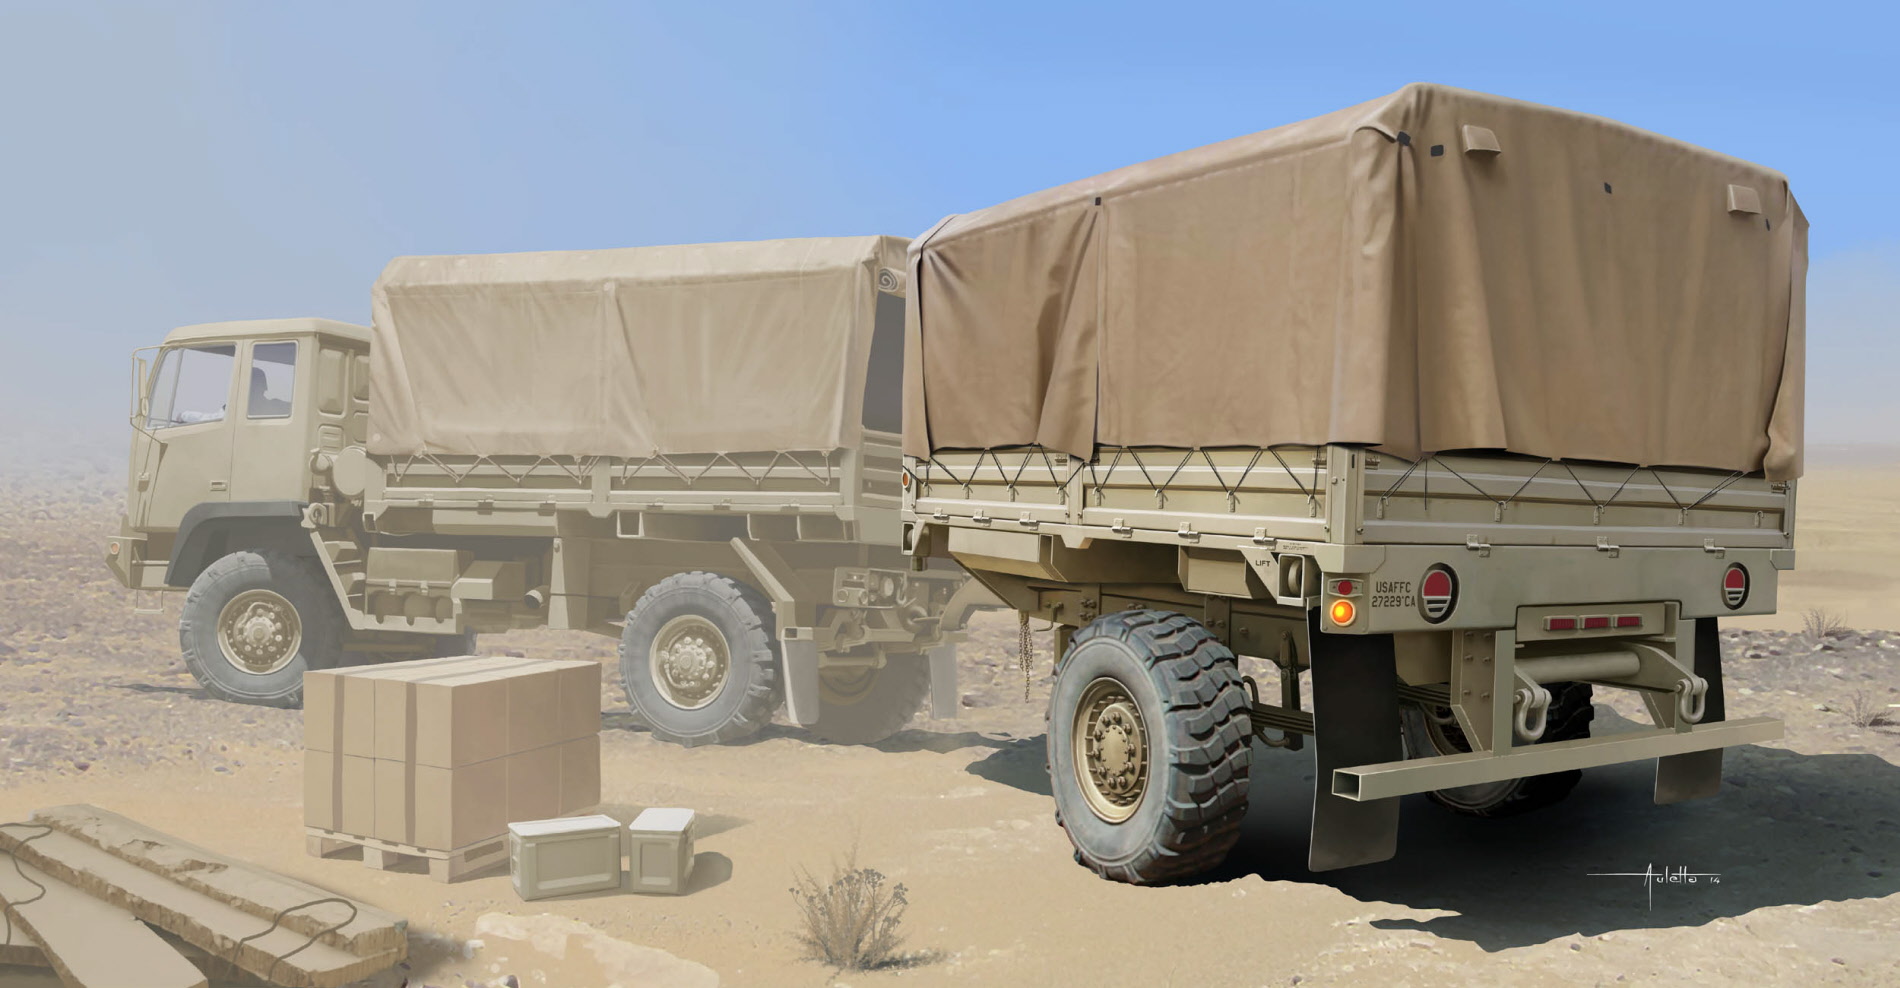 Car Military Army Artwork Military Vehicle Signature Truck Rear View 1900x988